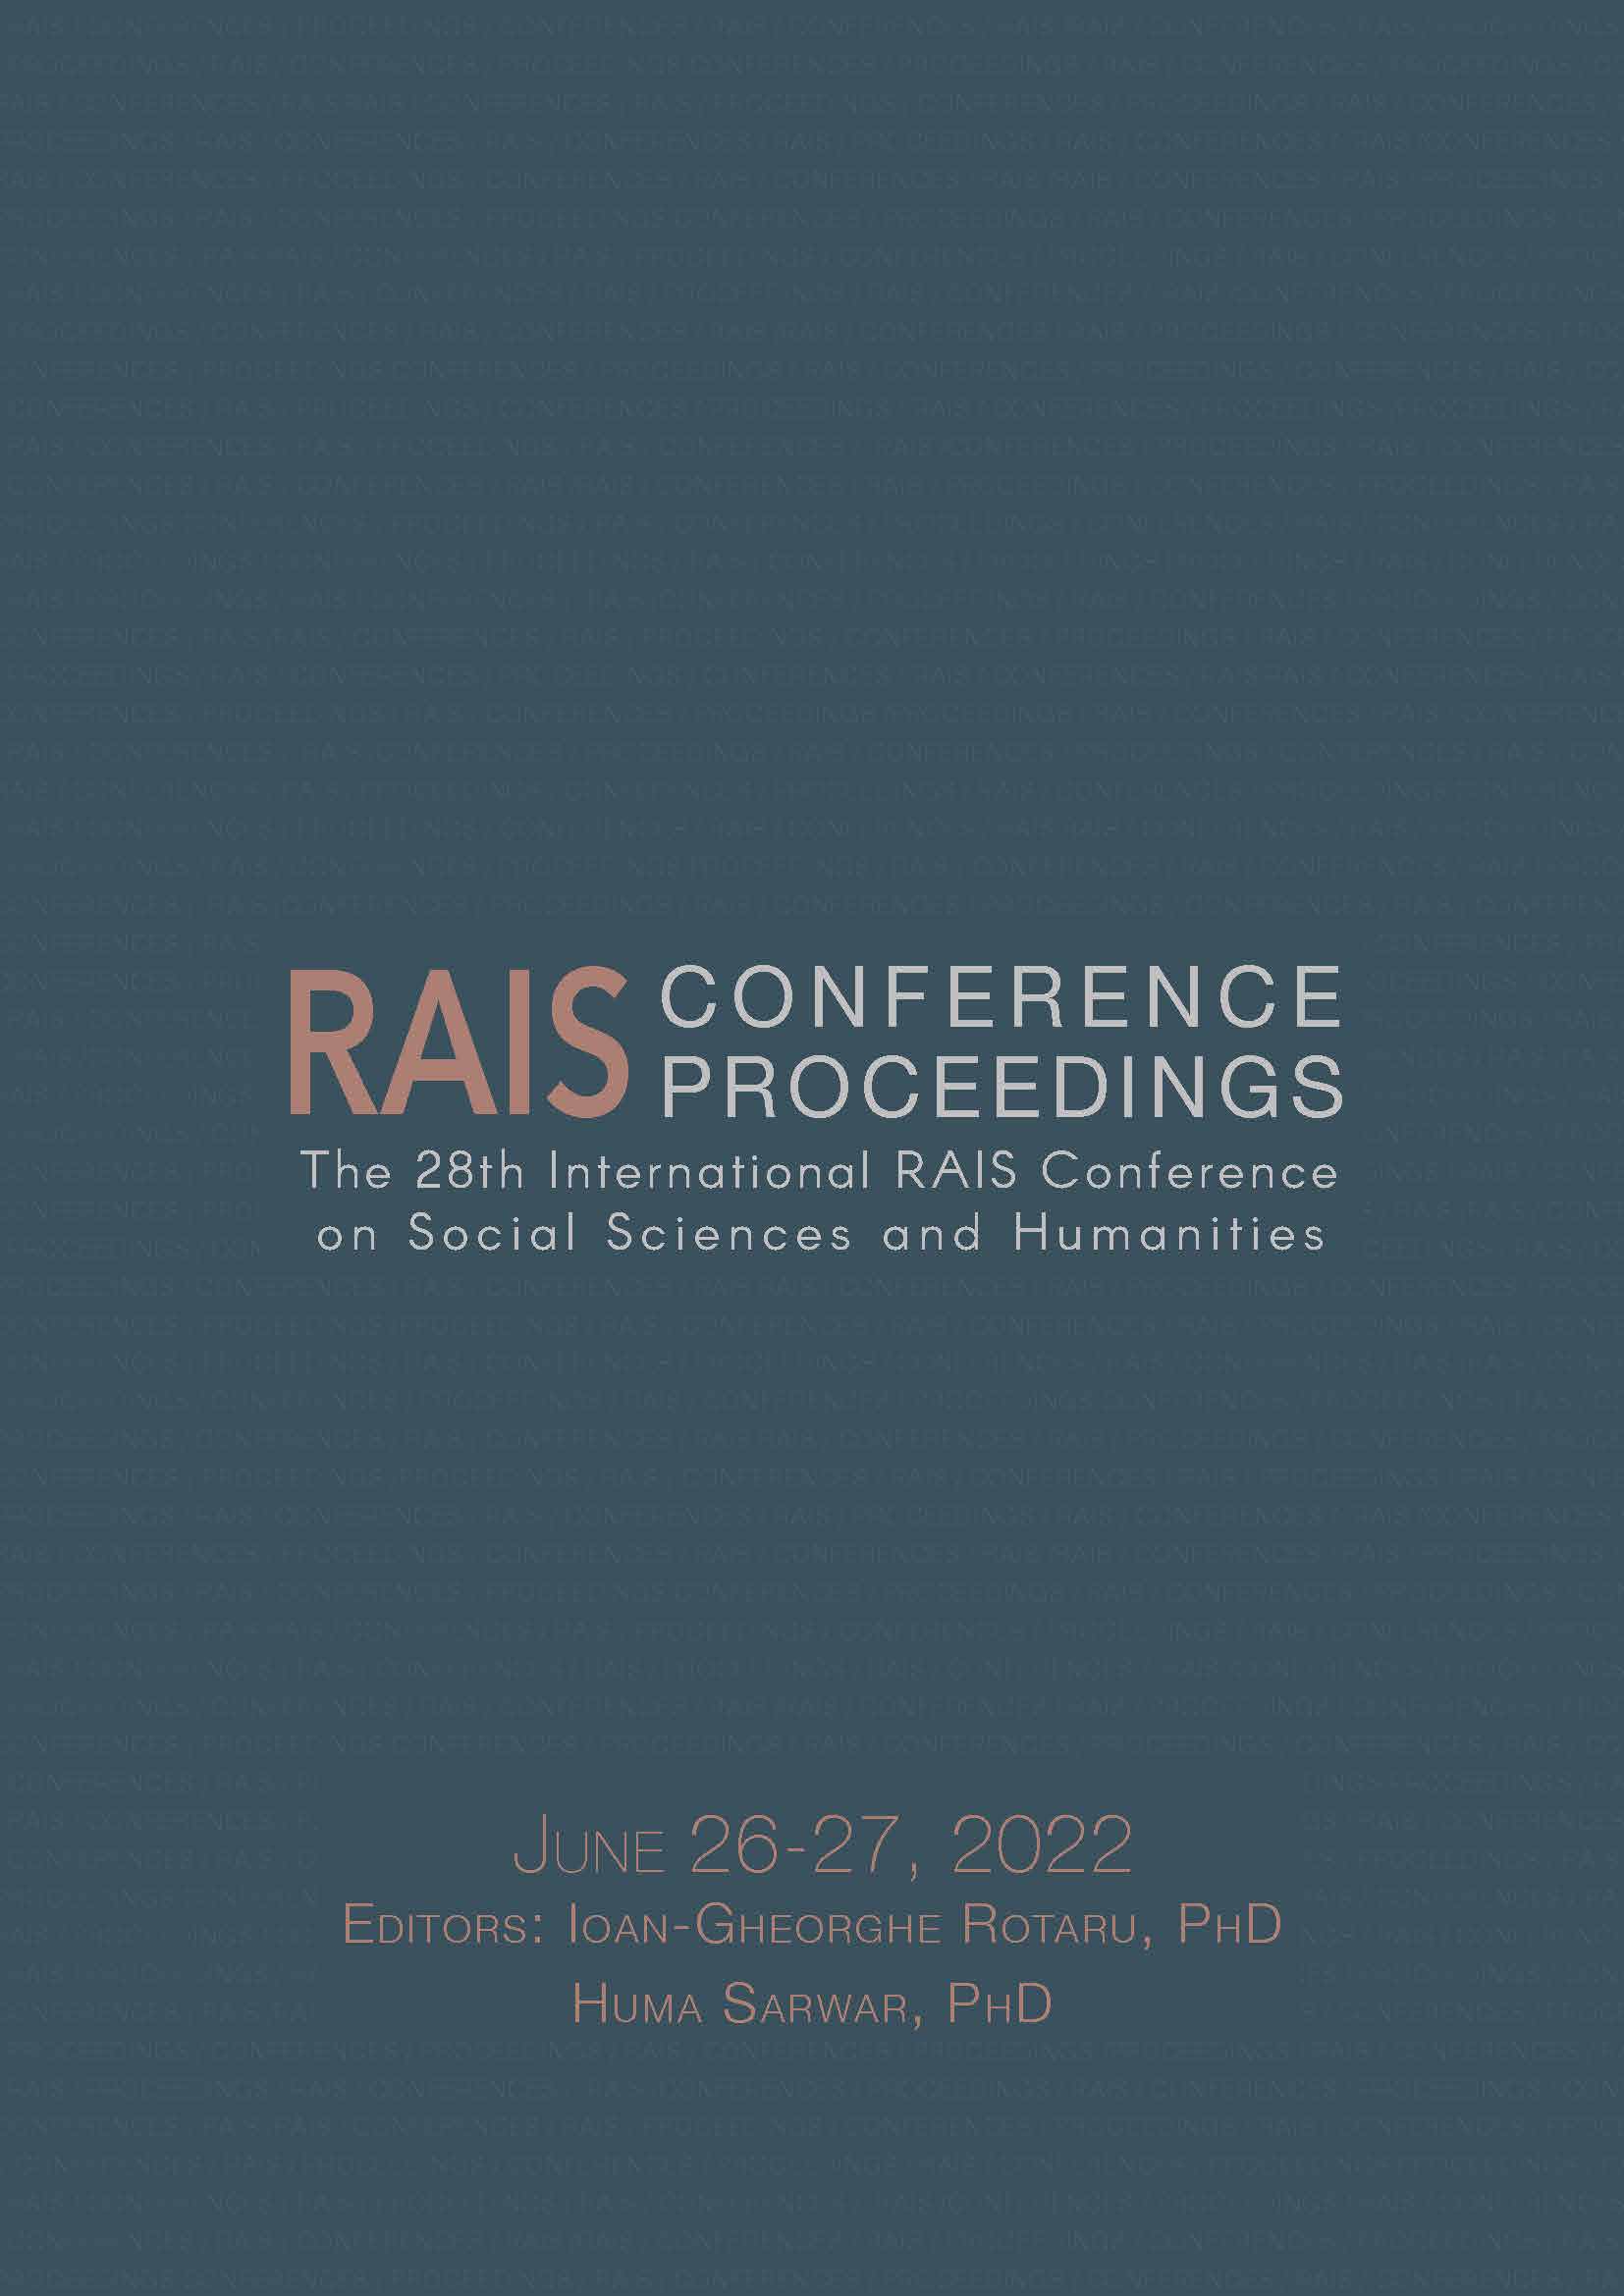 Proceedings of the 28th International RAIS Conference on Social Sciences and Humanities